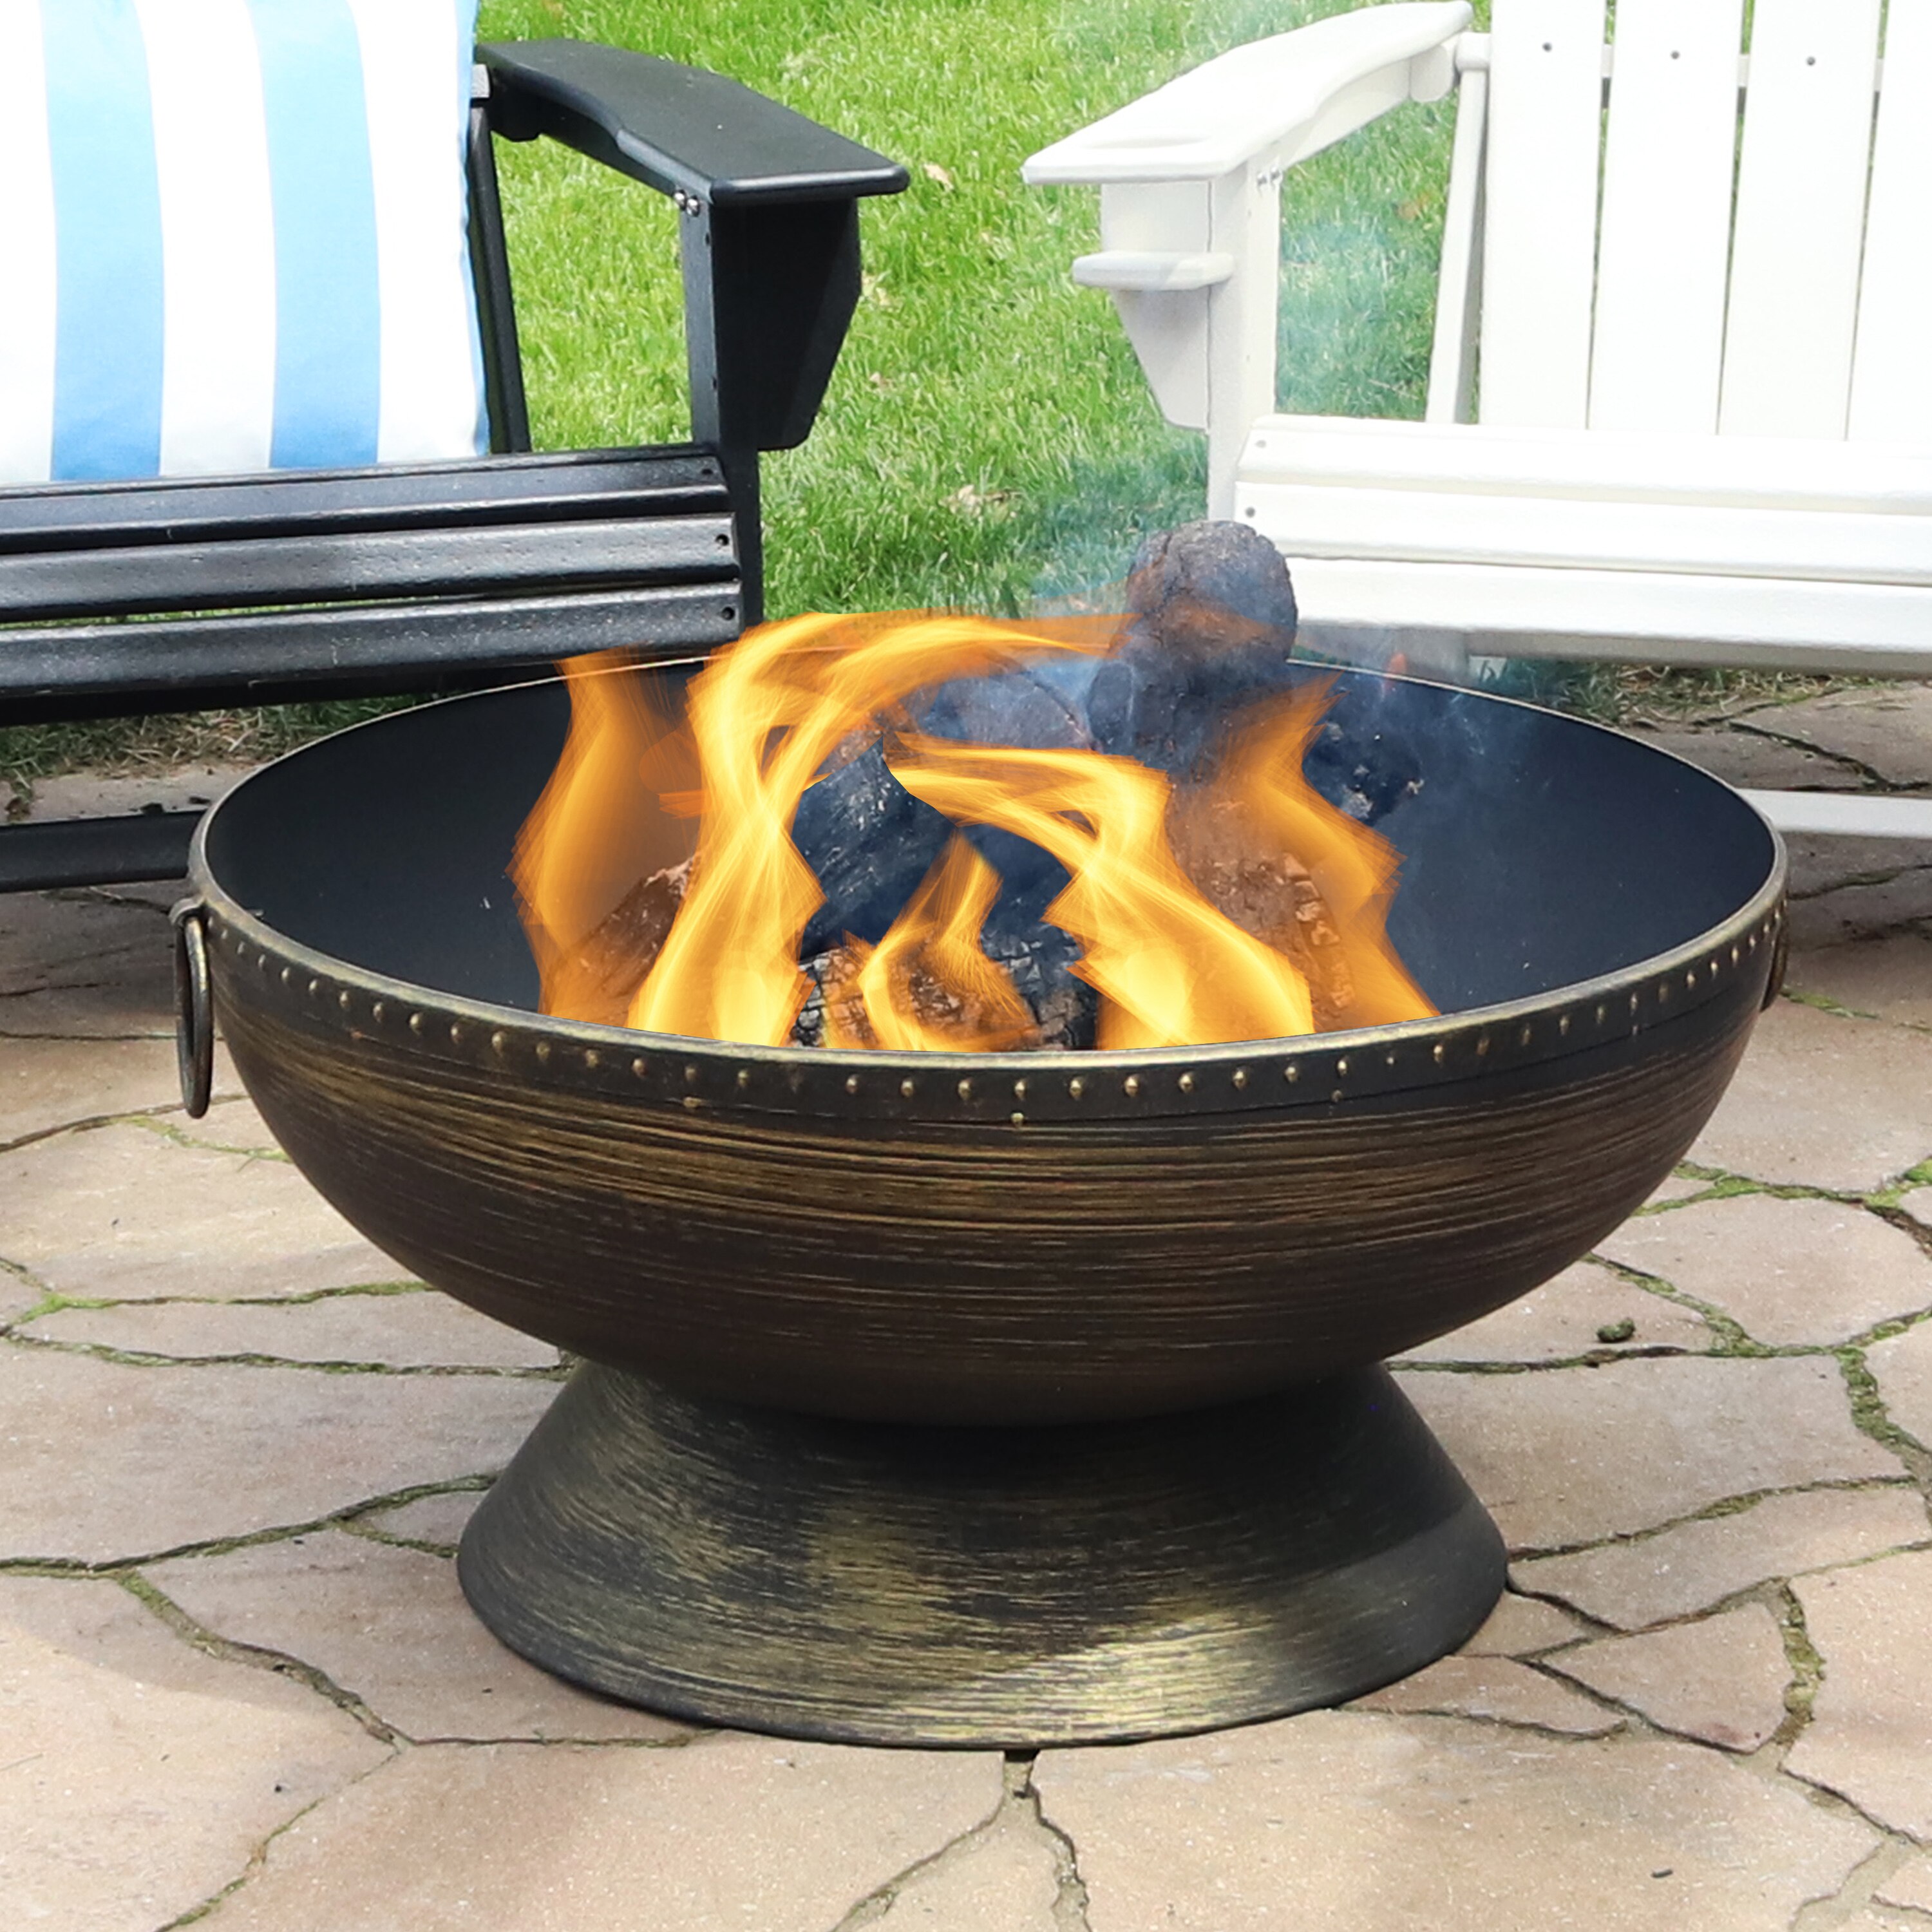 Fire Bowl Fire Pit with Handles & Spark Screen - 30-Inch - Online